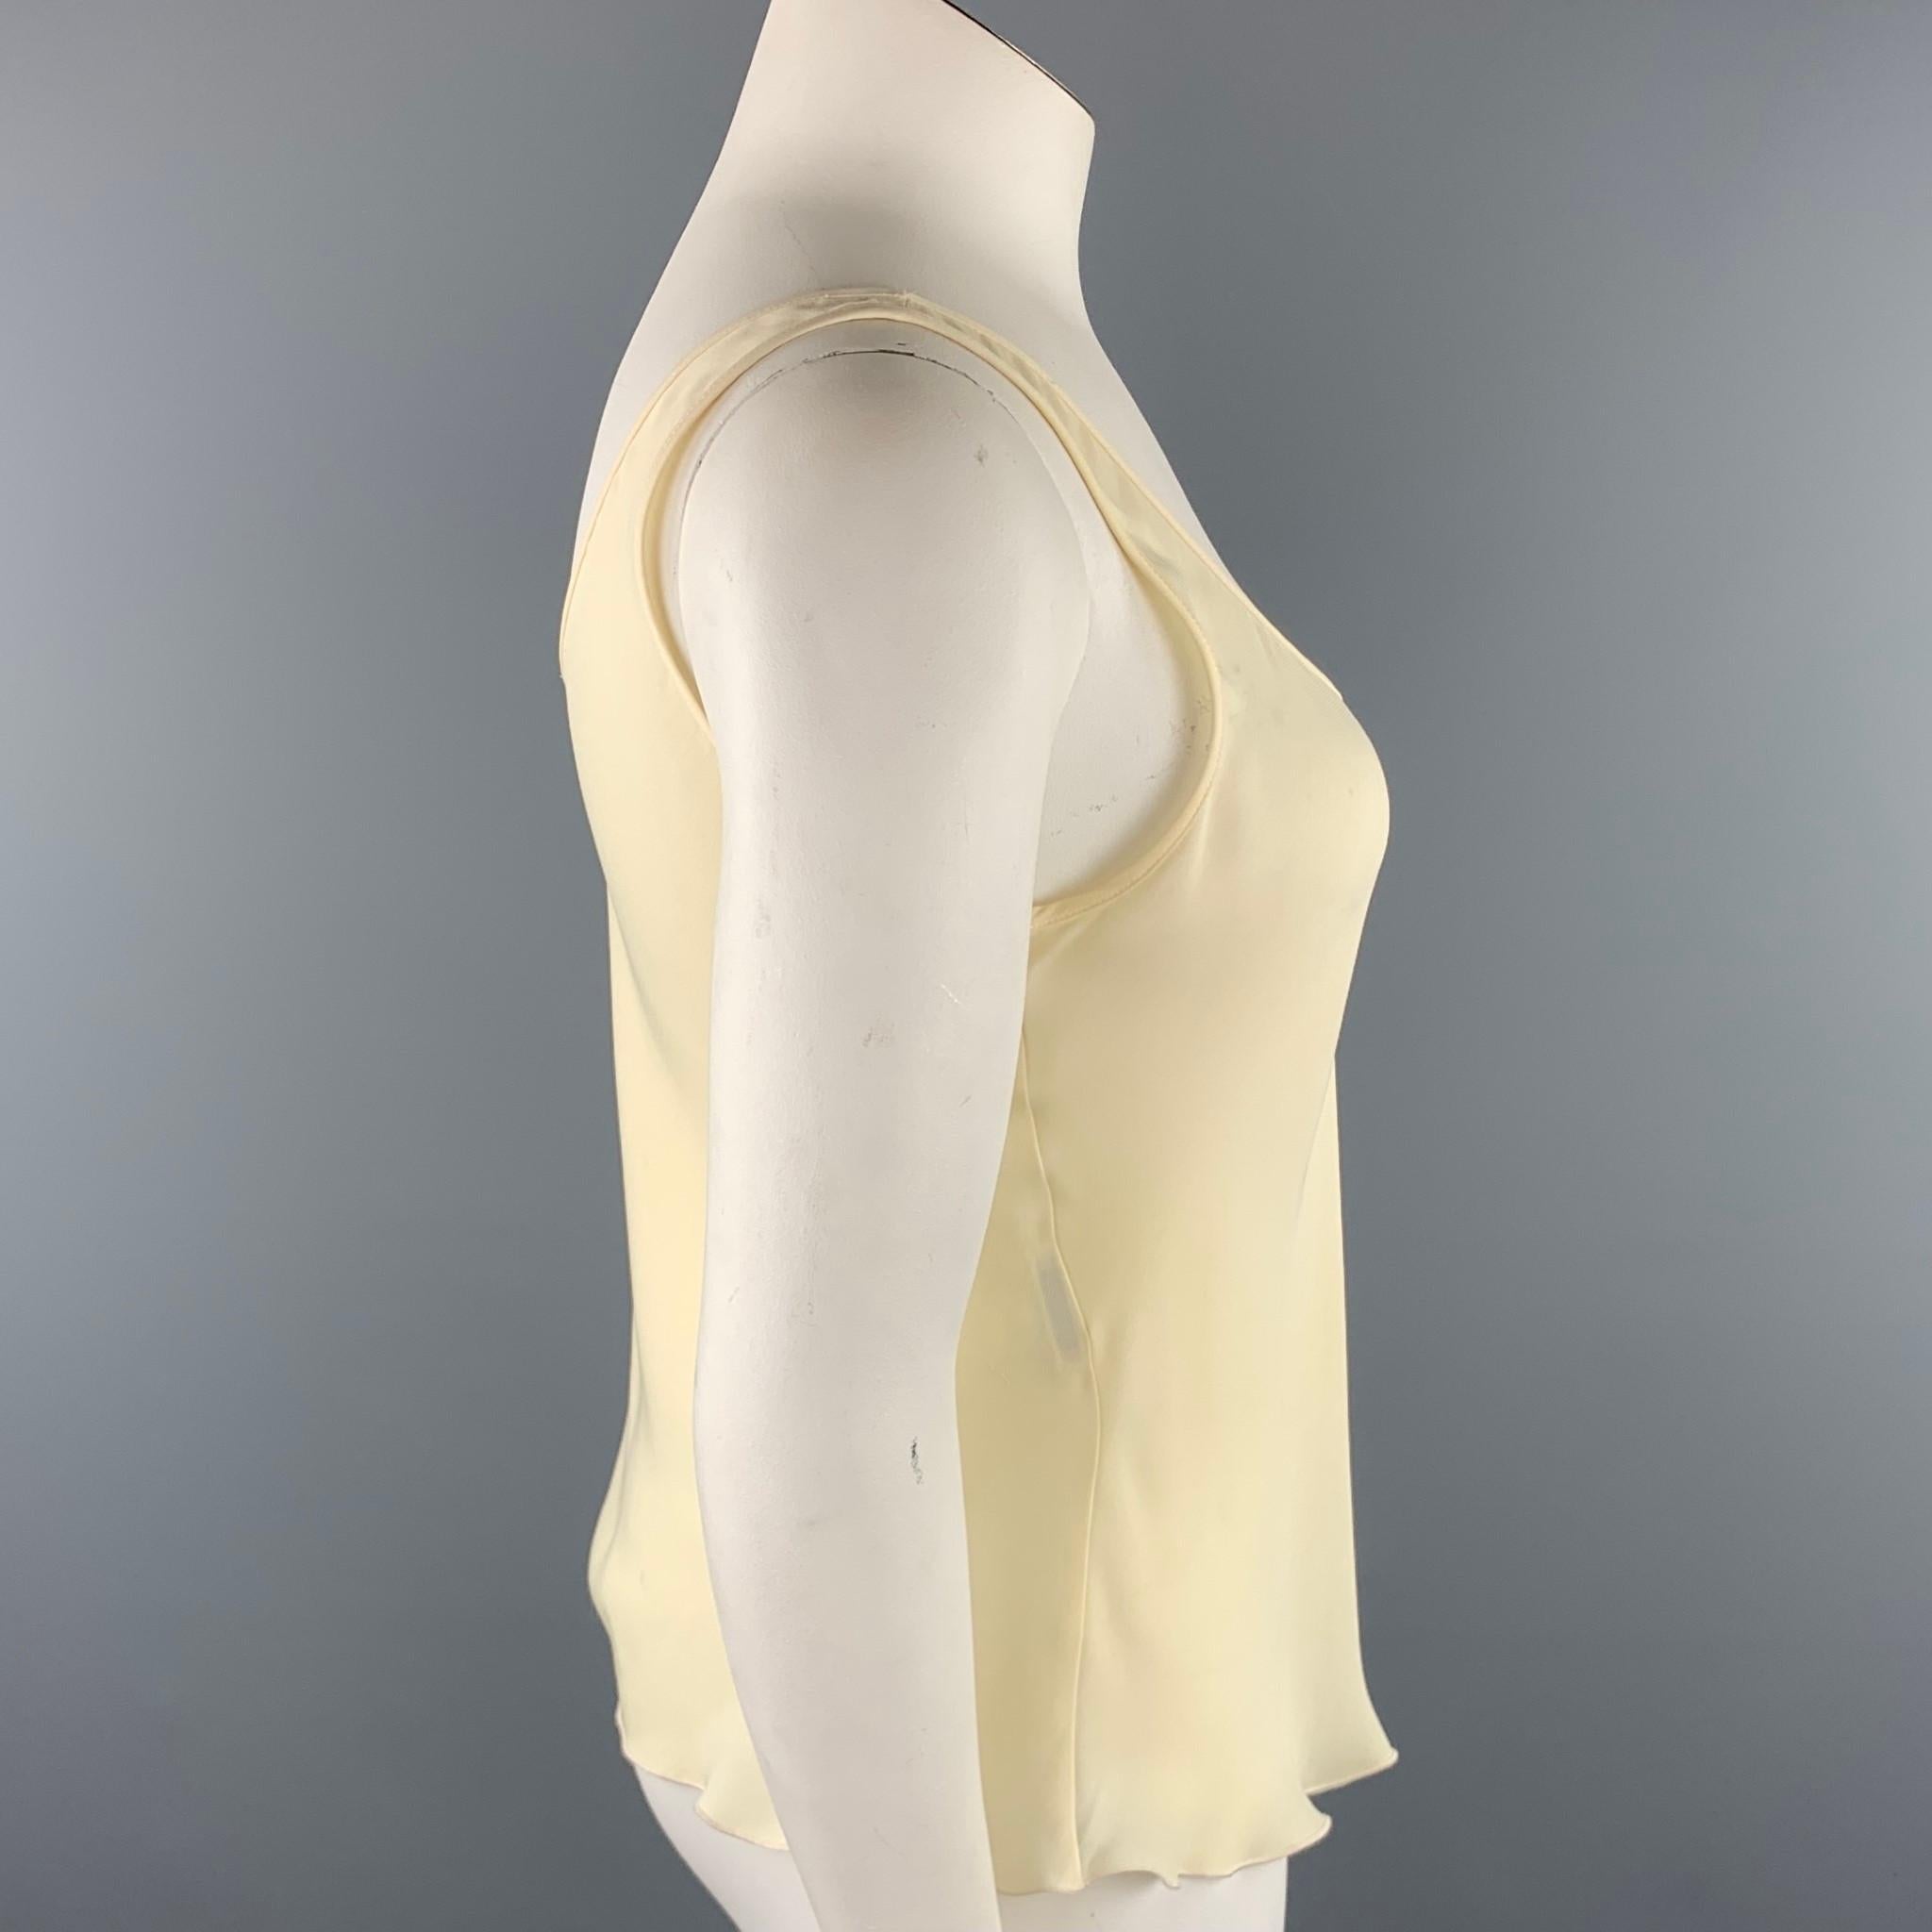 ARMANI COLLEZIONI camisole blouse comes in a cream silk blend featuring a scoop neck.

Very Good Pre-Owned Condition.
Marked: 12
Original Retail Price: $295.00

Measurements:

Bust: 36 in. 
Length: 17 in. 